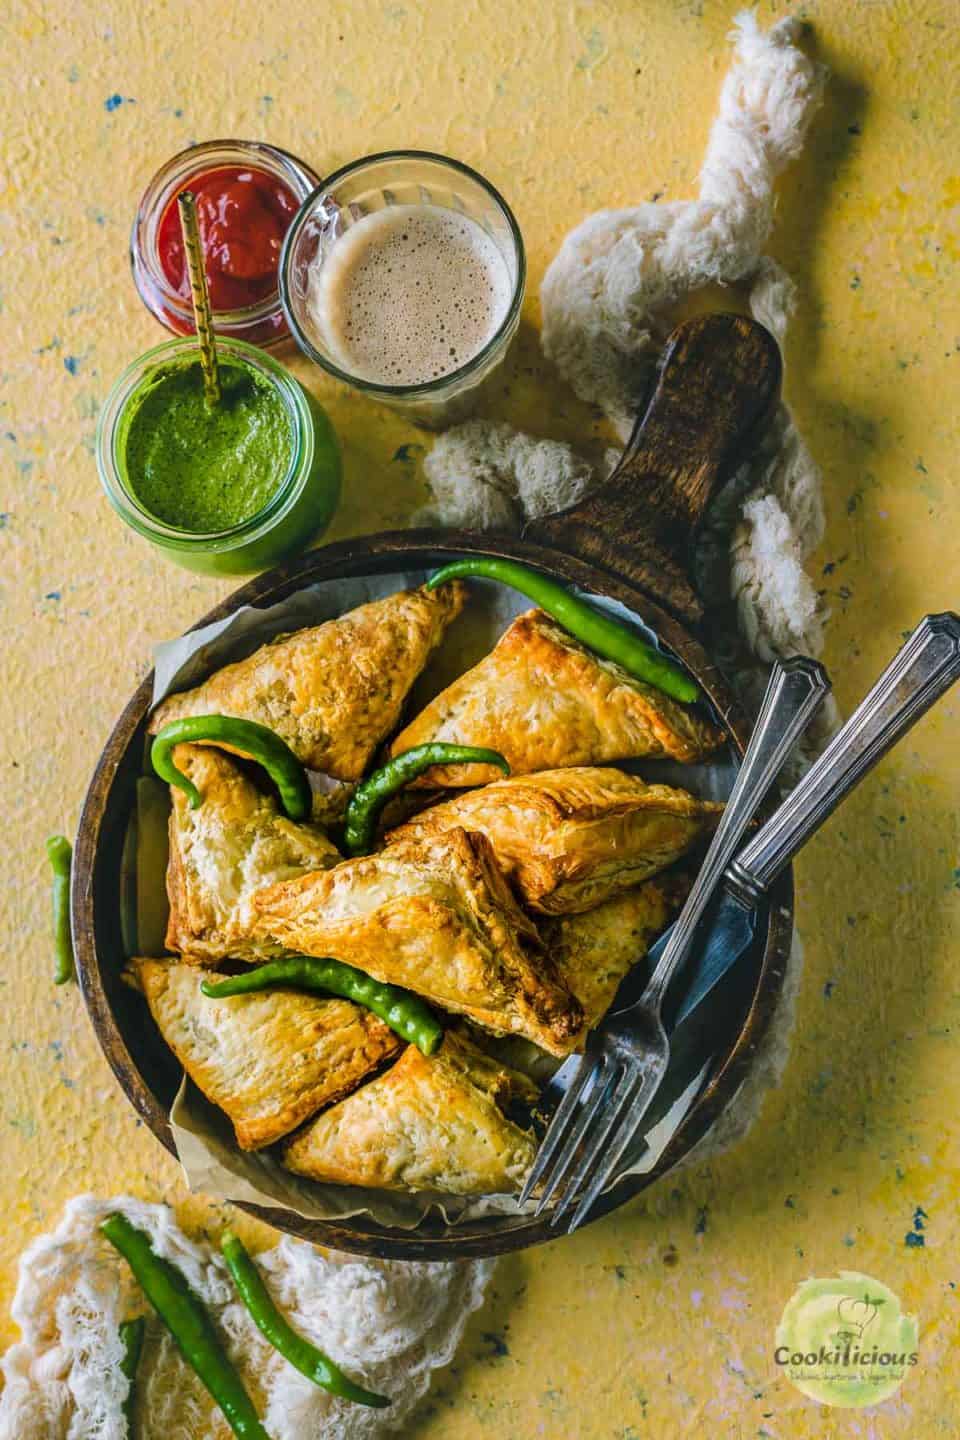 Vegetable Puff Pastry Samosa served with ketchup, chutney and chai.